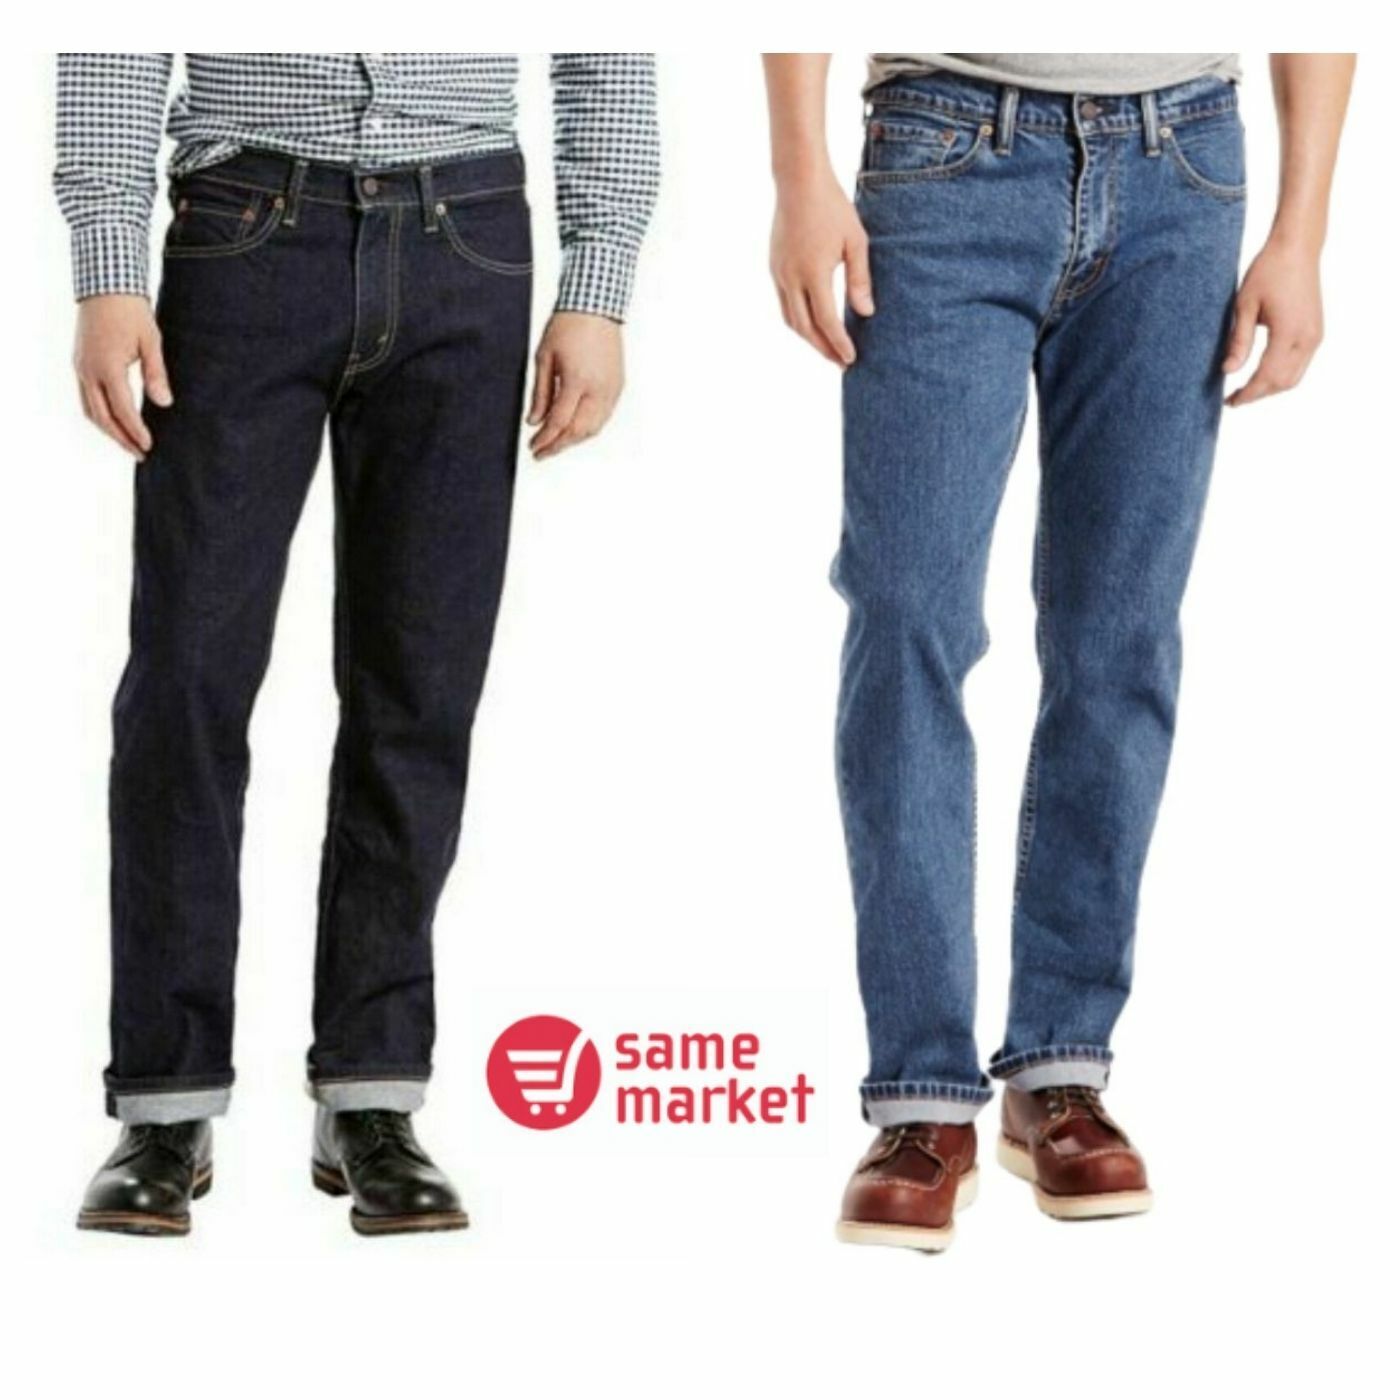 NEW Leviapos;s Menapos;s 505 Regular Size Jeans Kansas City Mall C Fit Free shipping anywhere in the nation amp;